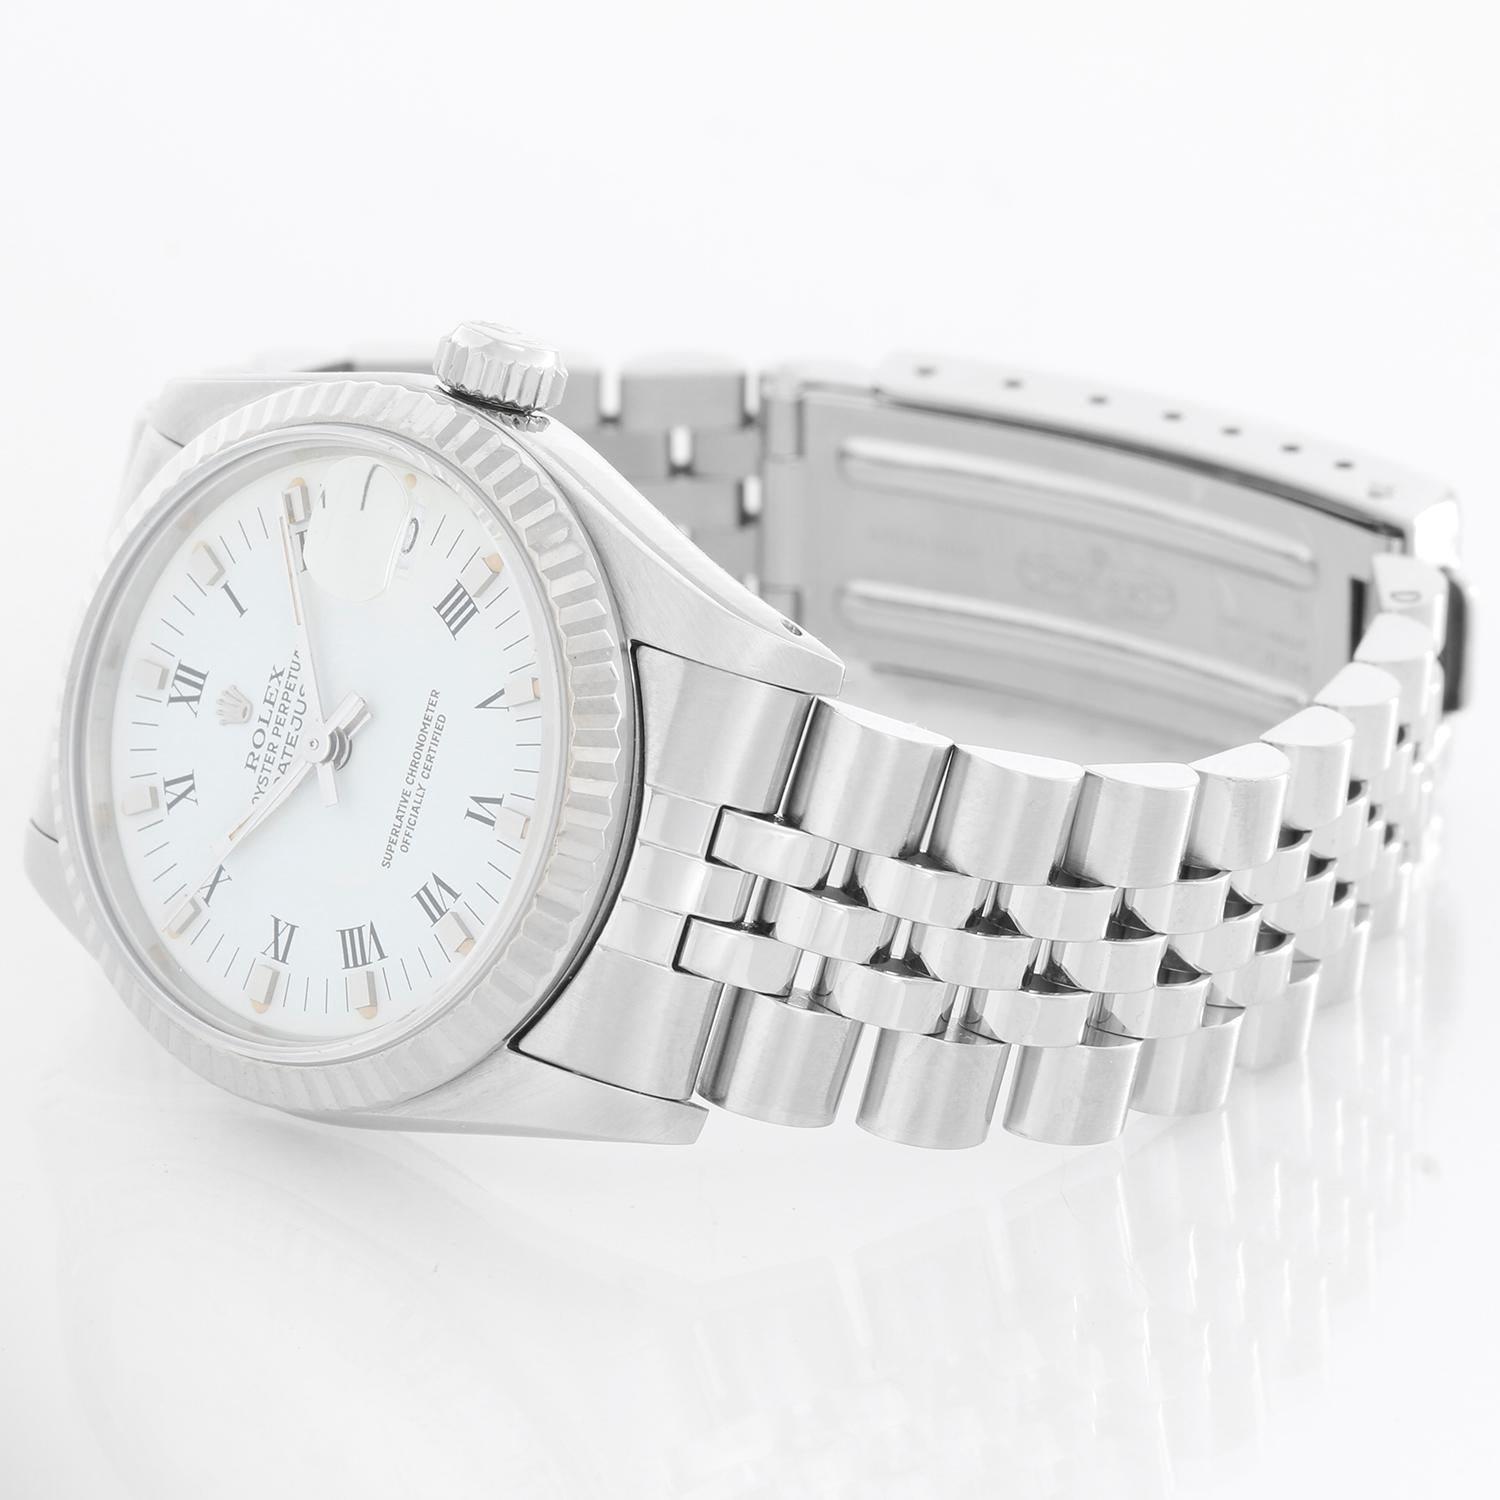 Rolex Datejust Midsize Men's or Ladies Steel Watch 68274 - Automatic winding, 29 jewels, Quickset date, sapphire crystal. Stainless steel case (31 mm ). White dial with roman numerals and. Stainless steel Jubilee Bracelet. Pre-owned with custom box